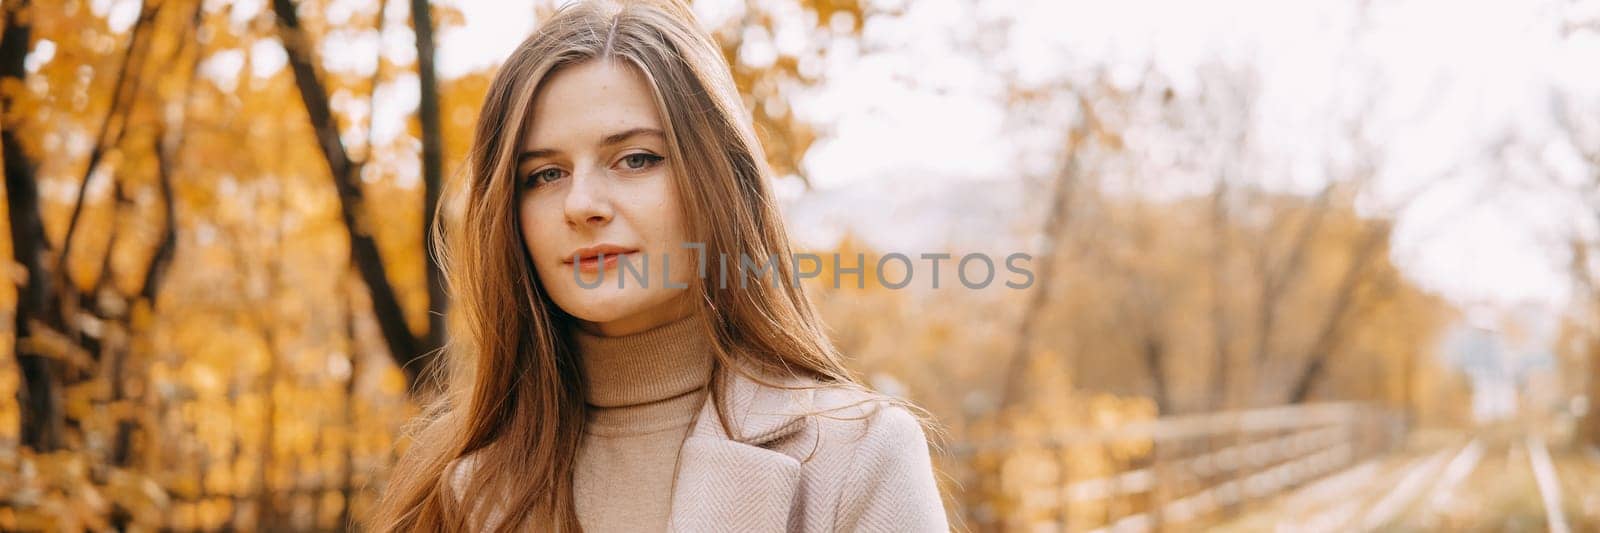 beautiful long-haired woman walks through the autumn streets. Railway, autumn, woman in a coat by Annu1tochka